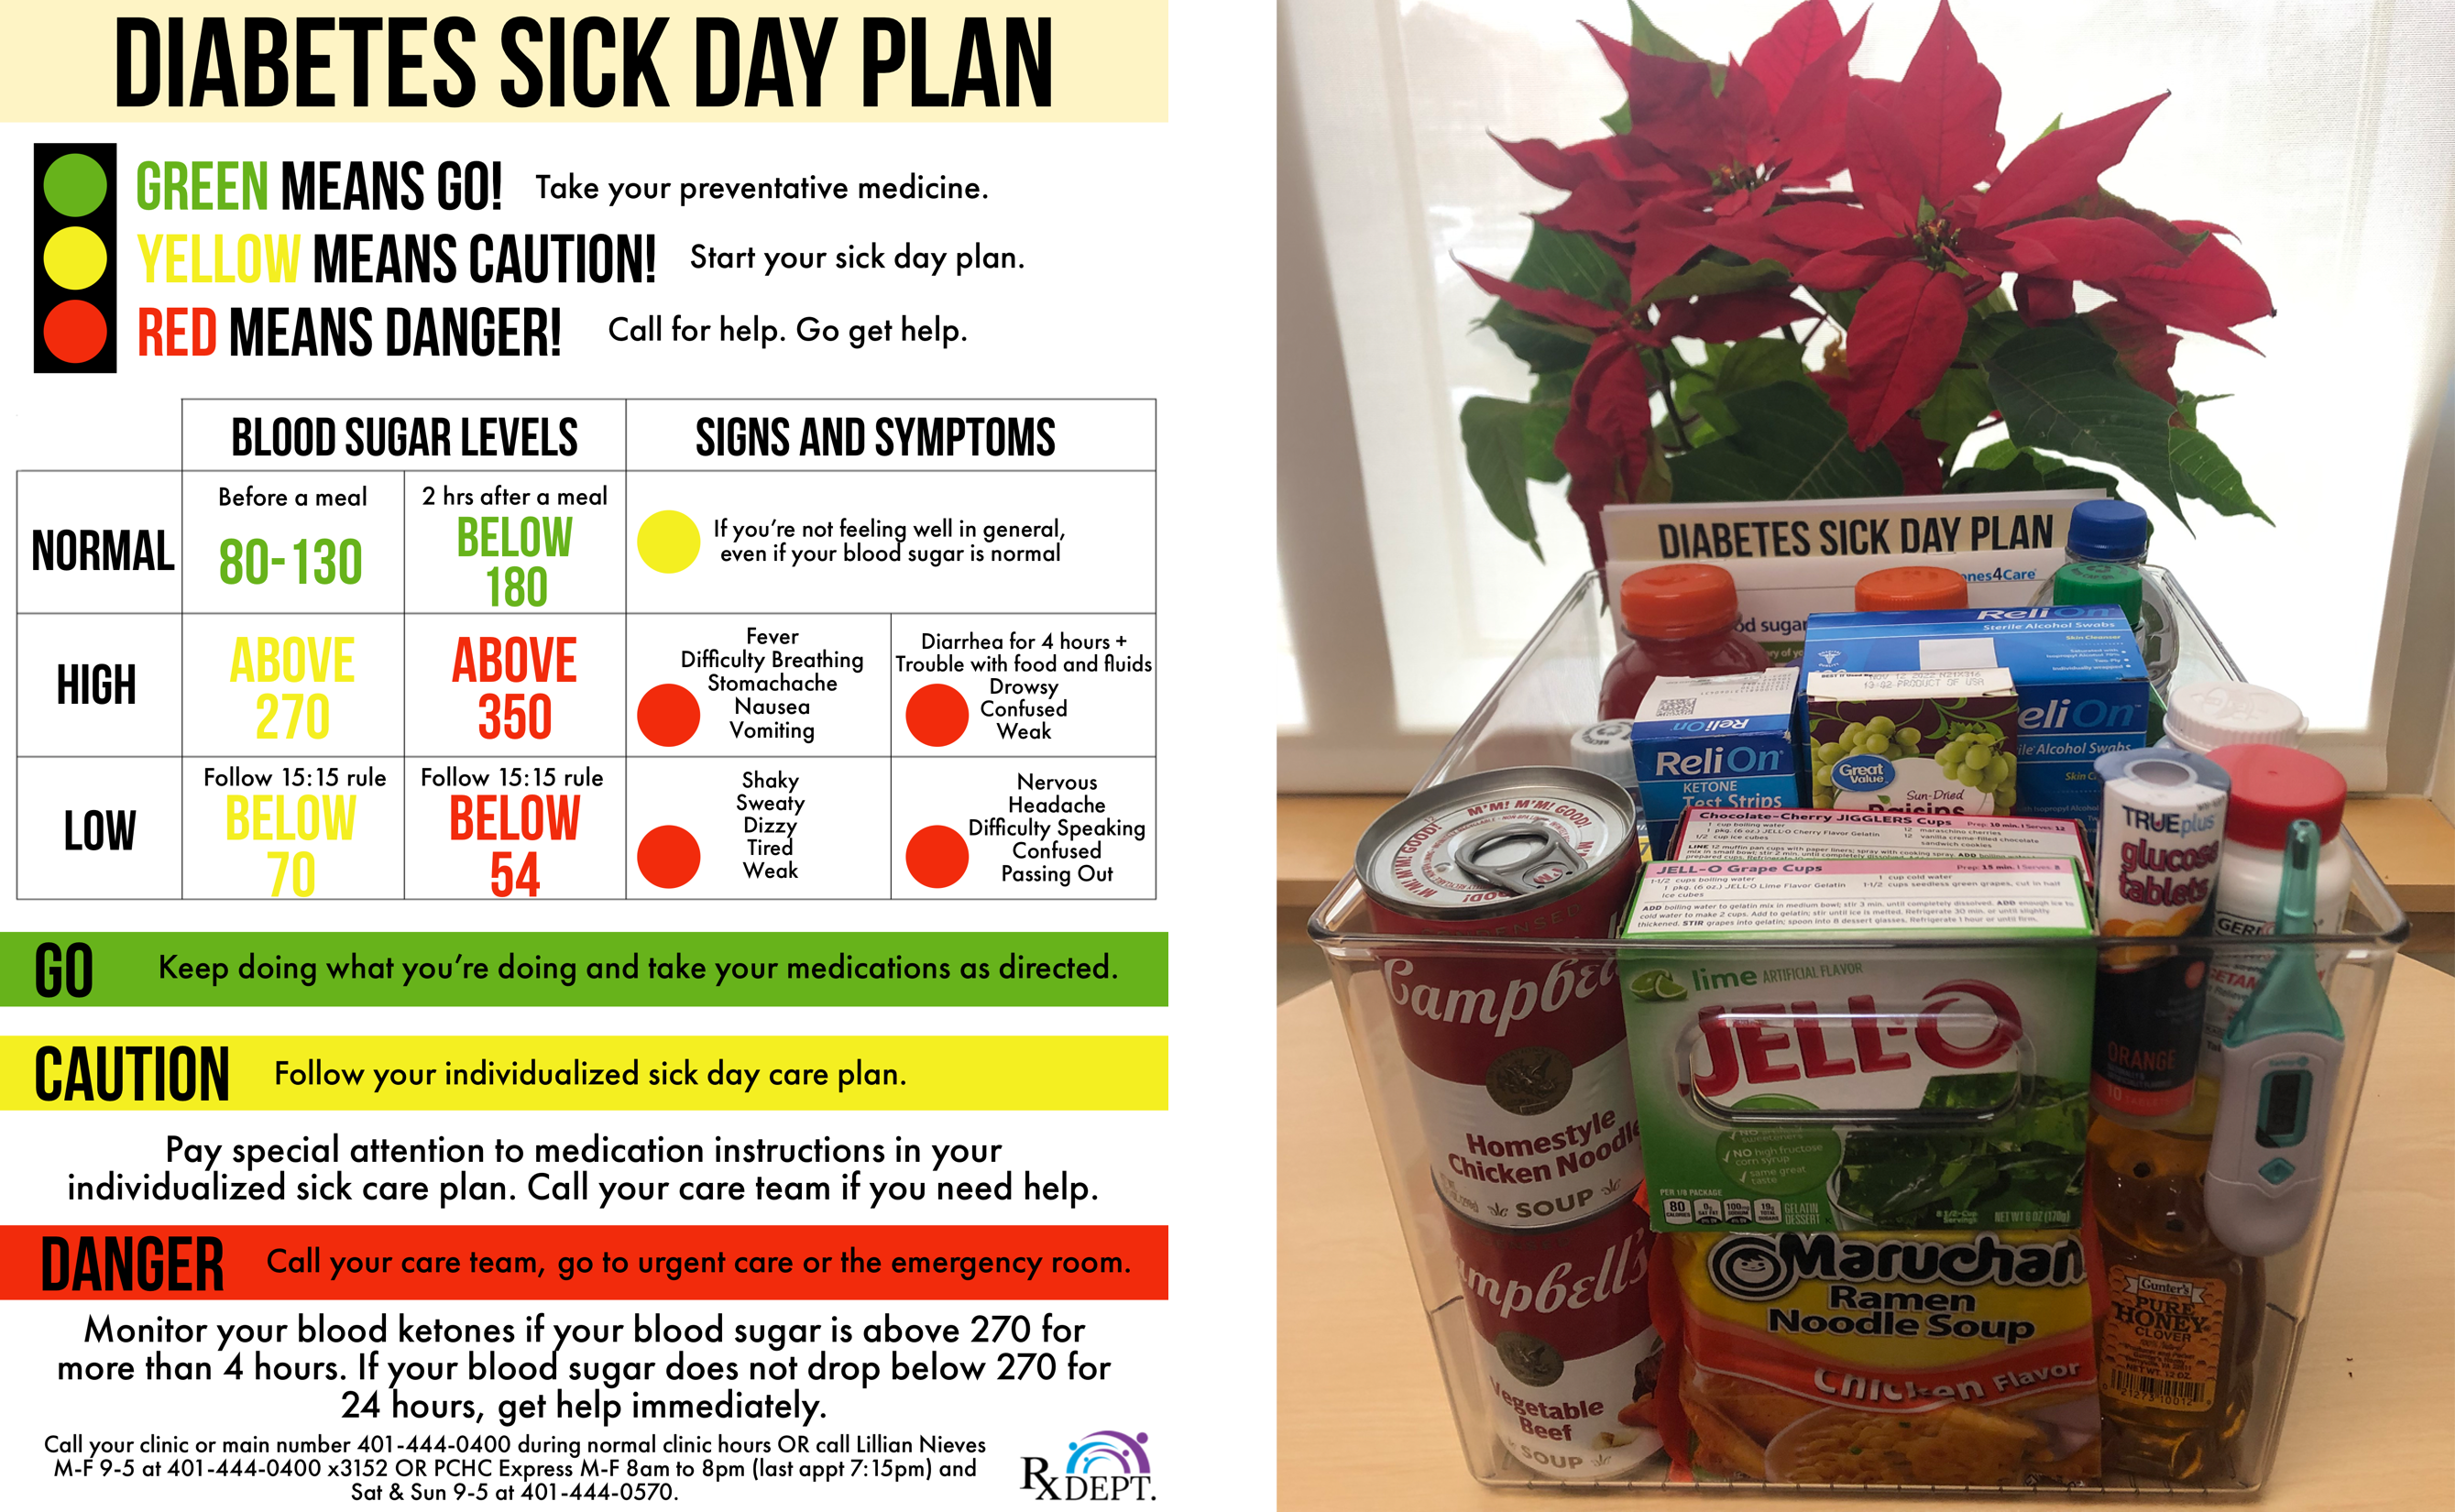 Pamphlet of diabetes sick day plan with a photo of a sick box containing soup and jello